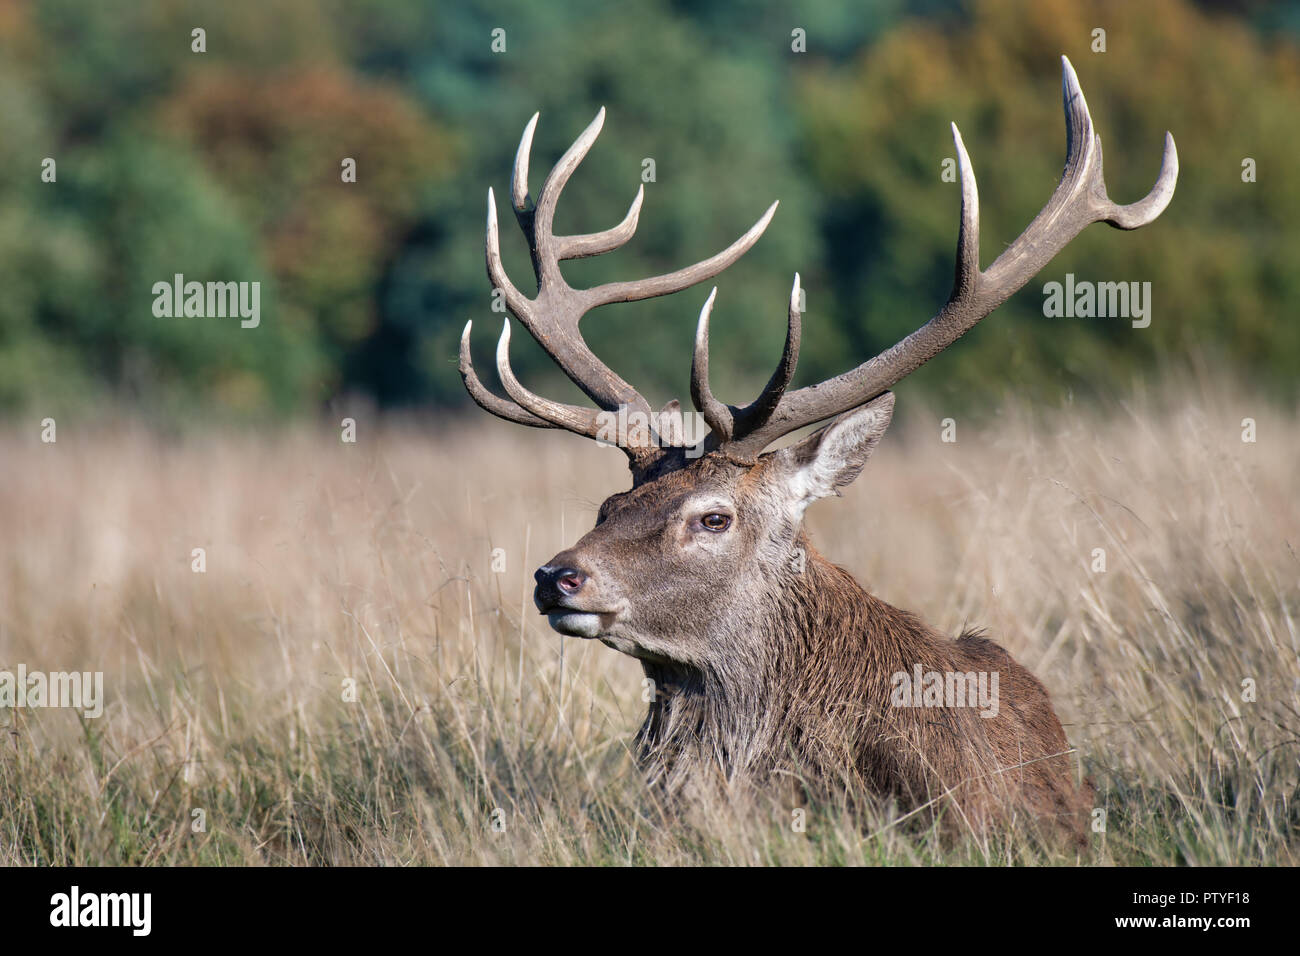 A royal red deer stag lies lazily on the grass in the sunlight. It is looking to the left and clearly shows his detailed antlers and tines Stock Photo